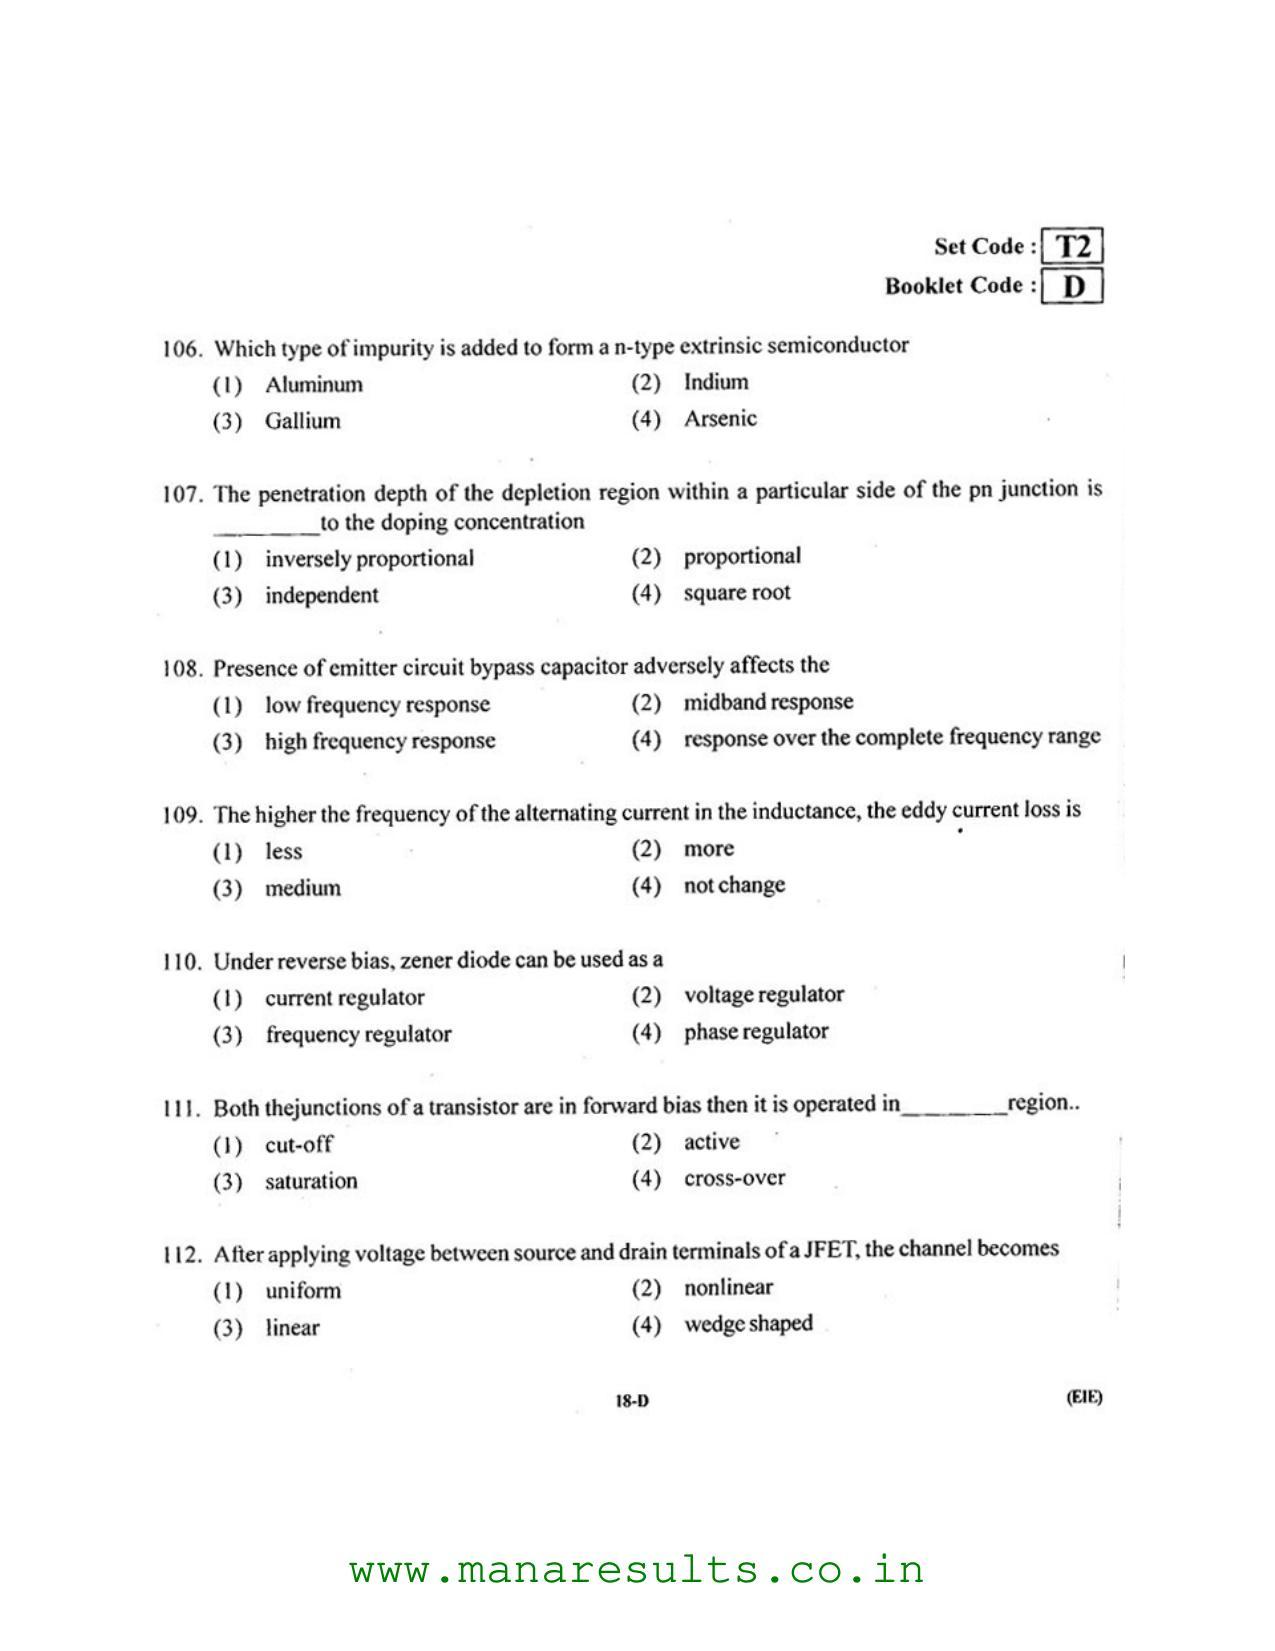 AP ECET 2016 Electronics and Instrumentation Engineering Old Previous Question Papers - Page 17